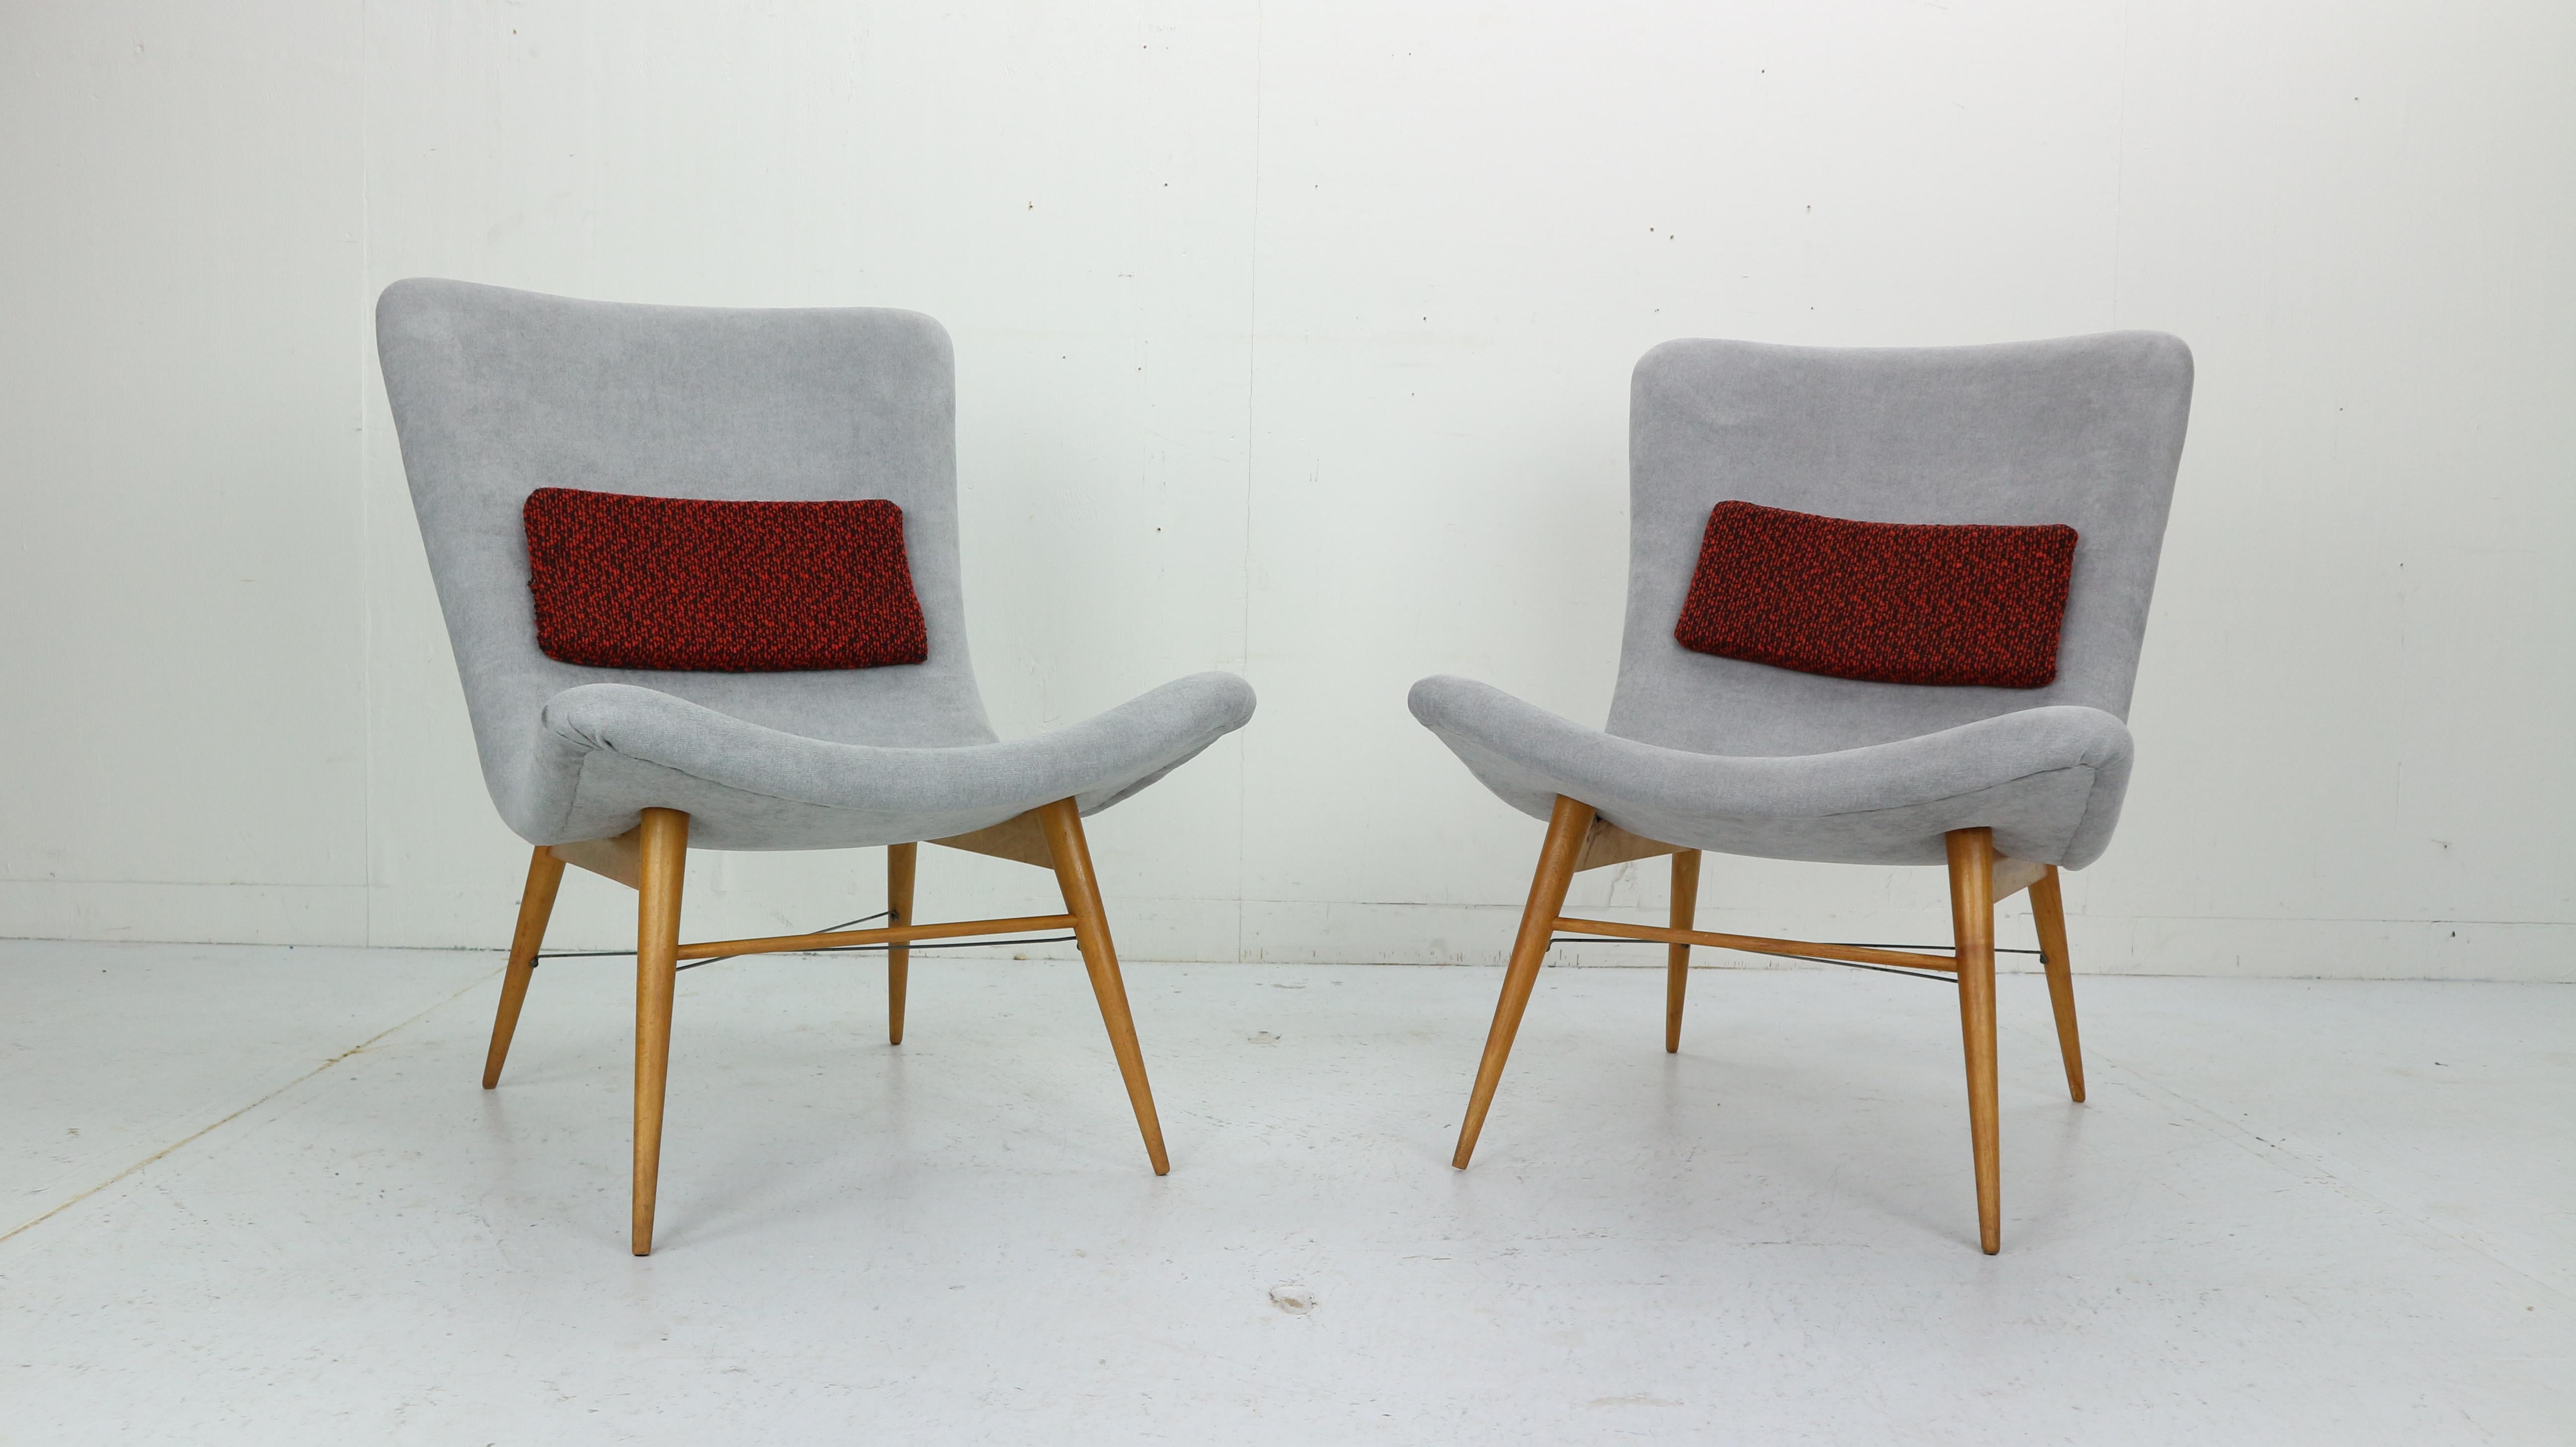 Set of two lounge chairs by Miroslav Navratil, manufactured in former Czechoslovakia by Cesky Nabytek, 1959s.
Original wooden base.
Both chairs have been newly reupholstered with light gray fabric. The little cushions are still having an original